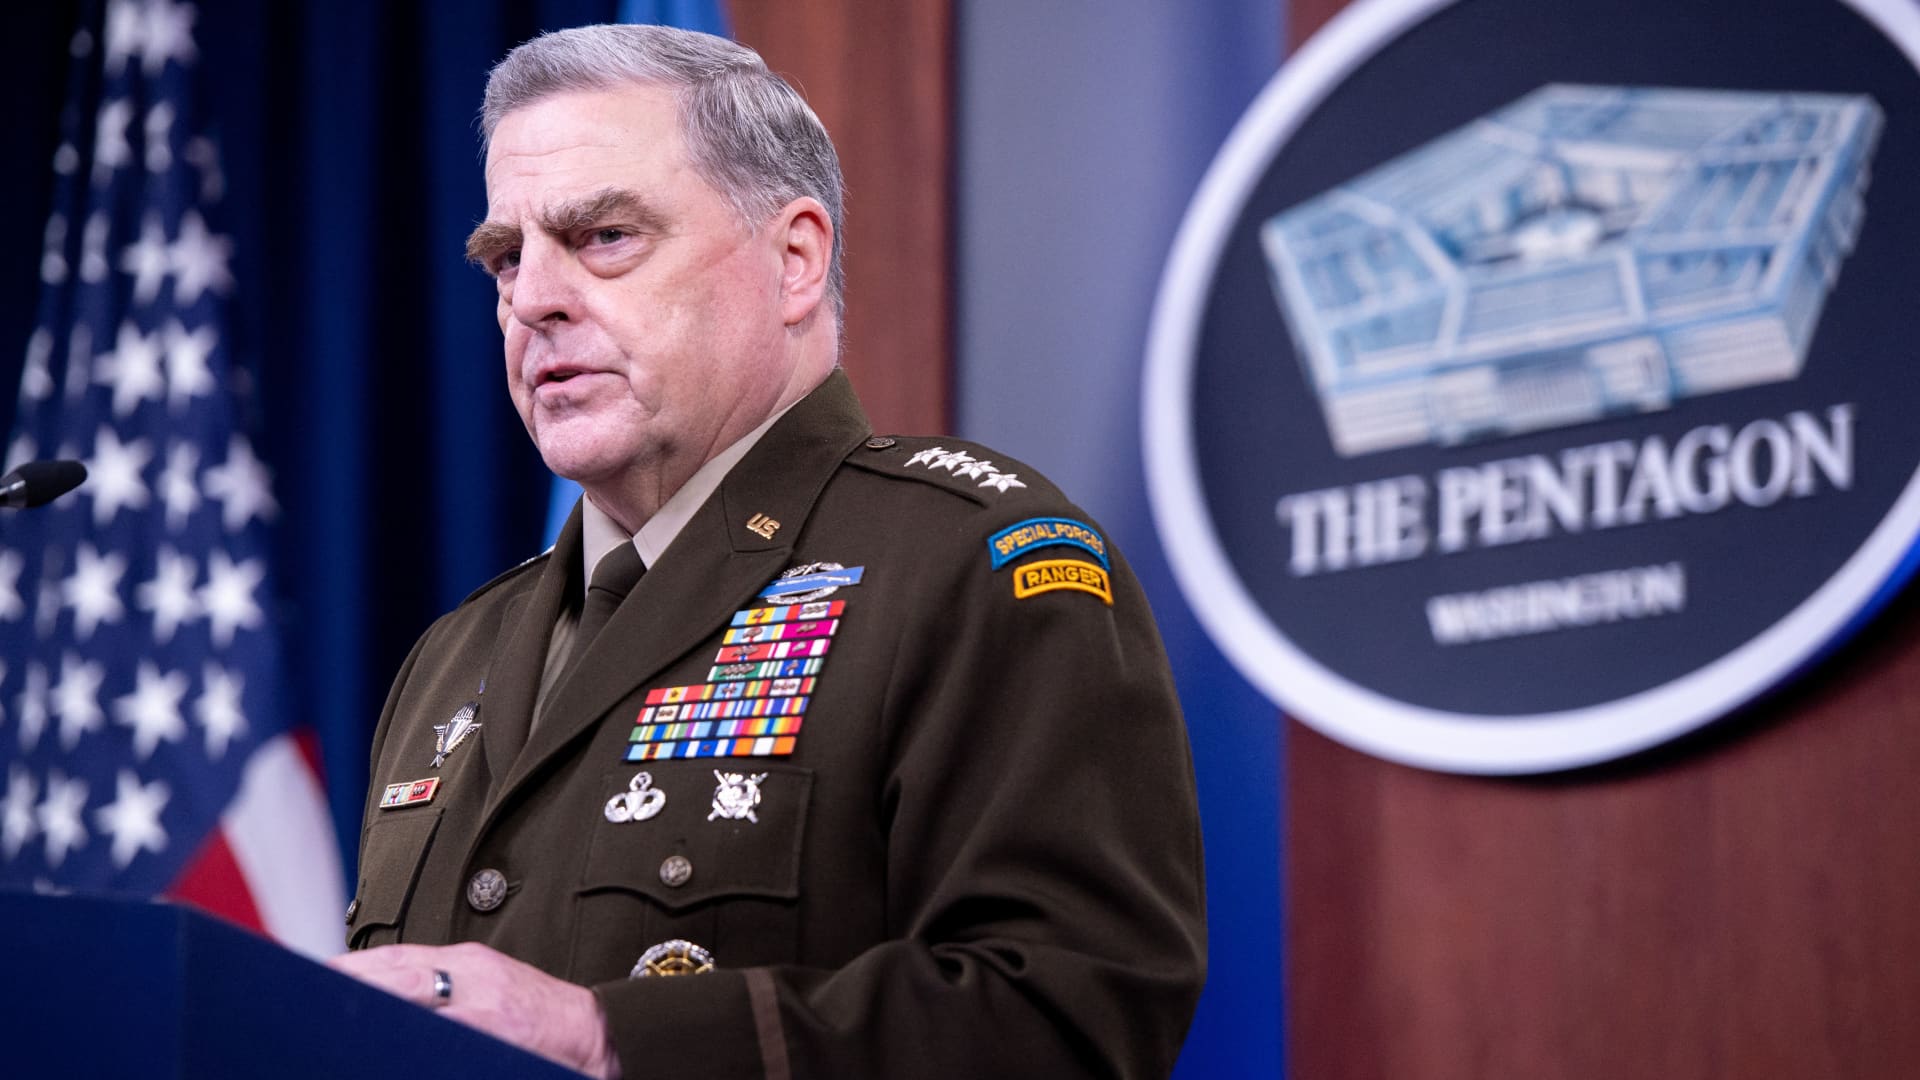 US Army General Mark Milley, Chairman of the Joint Chiefs of Staff, holds a press briefing about the US military drawdown in Afghanistan, at the Pentagon in Washington, DC September 1, 2021.